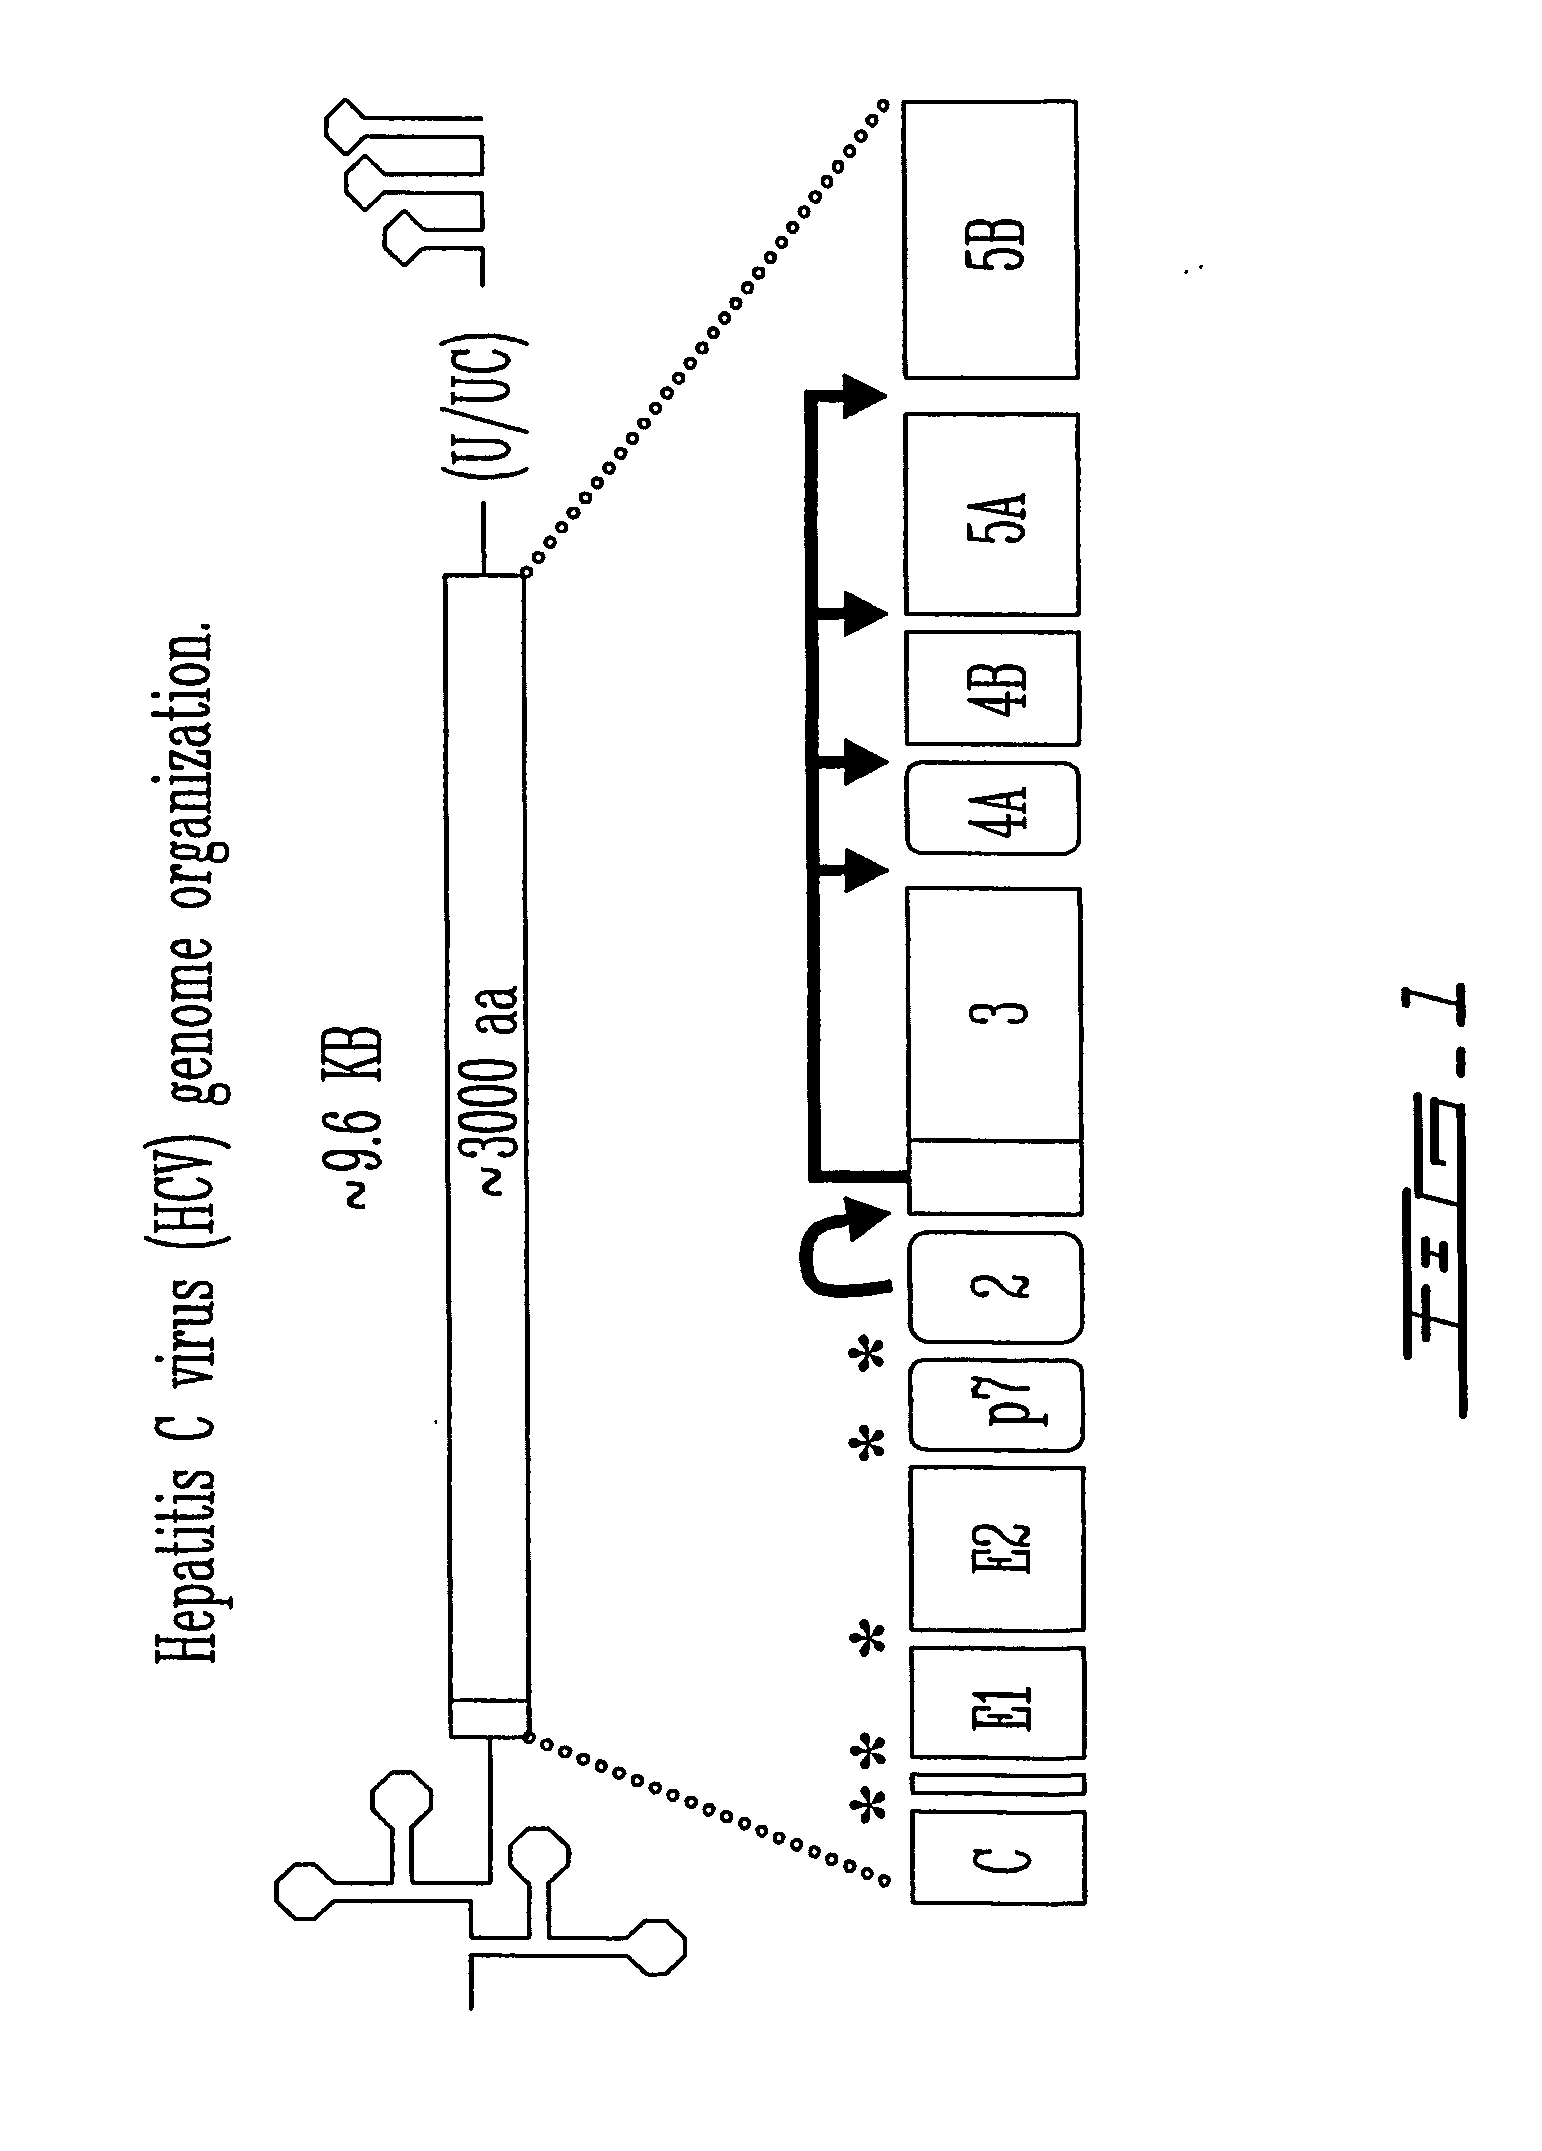 Method for inducing hepatitis c virus (hcv) replication in vitro, cells and cell lines enabling robust hcv replication and kit therefor